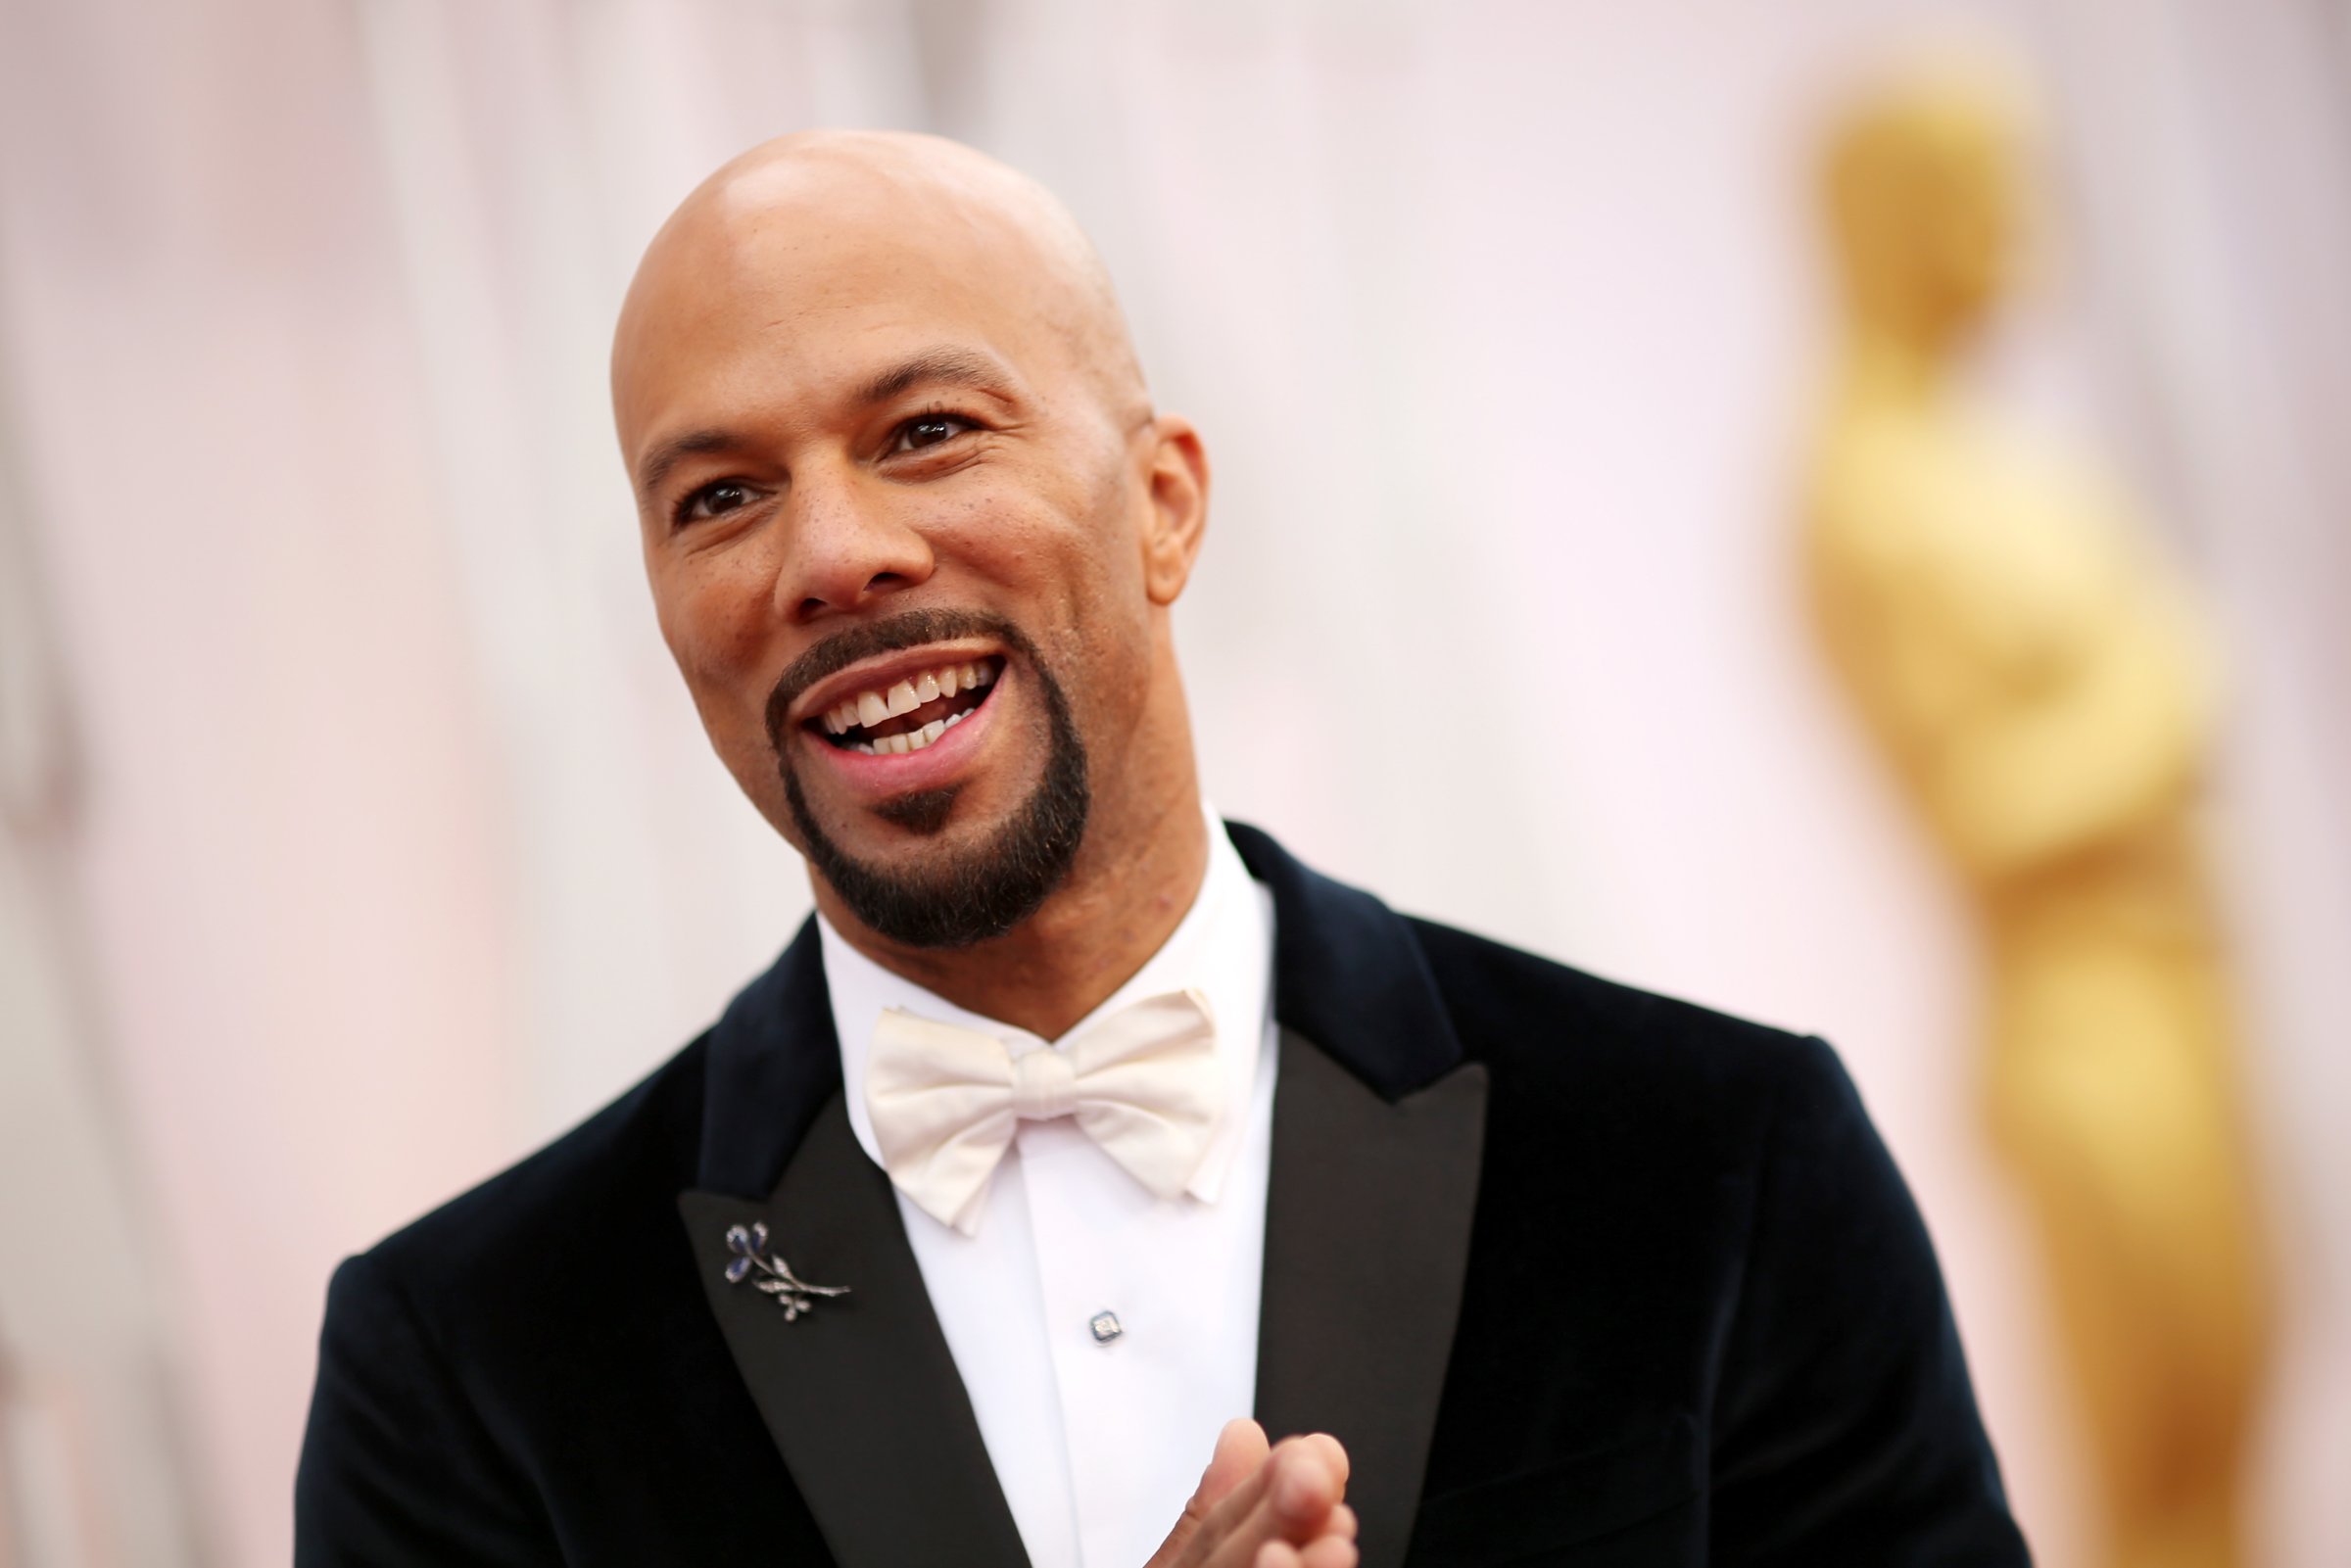 Rapper/actor Common attends the 87th Annual Academy Awards at Hollywood &Highland Center on Feb. 22, 2015 in Hollywood.